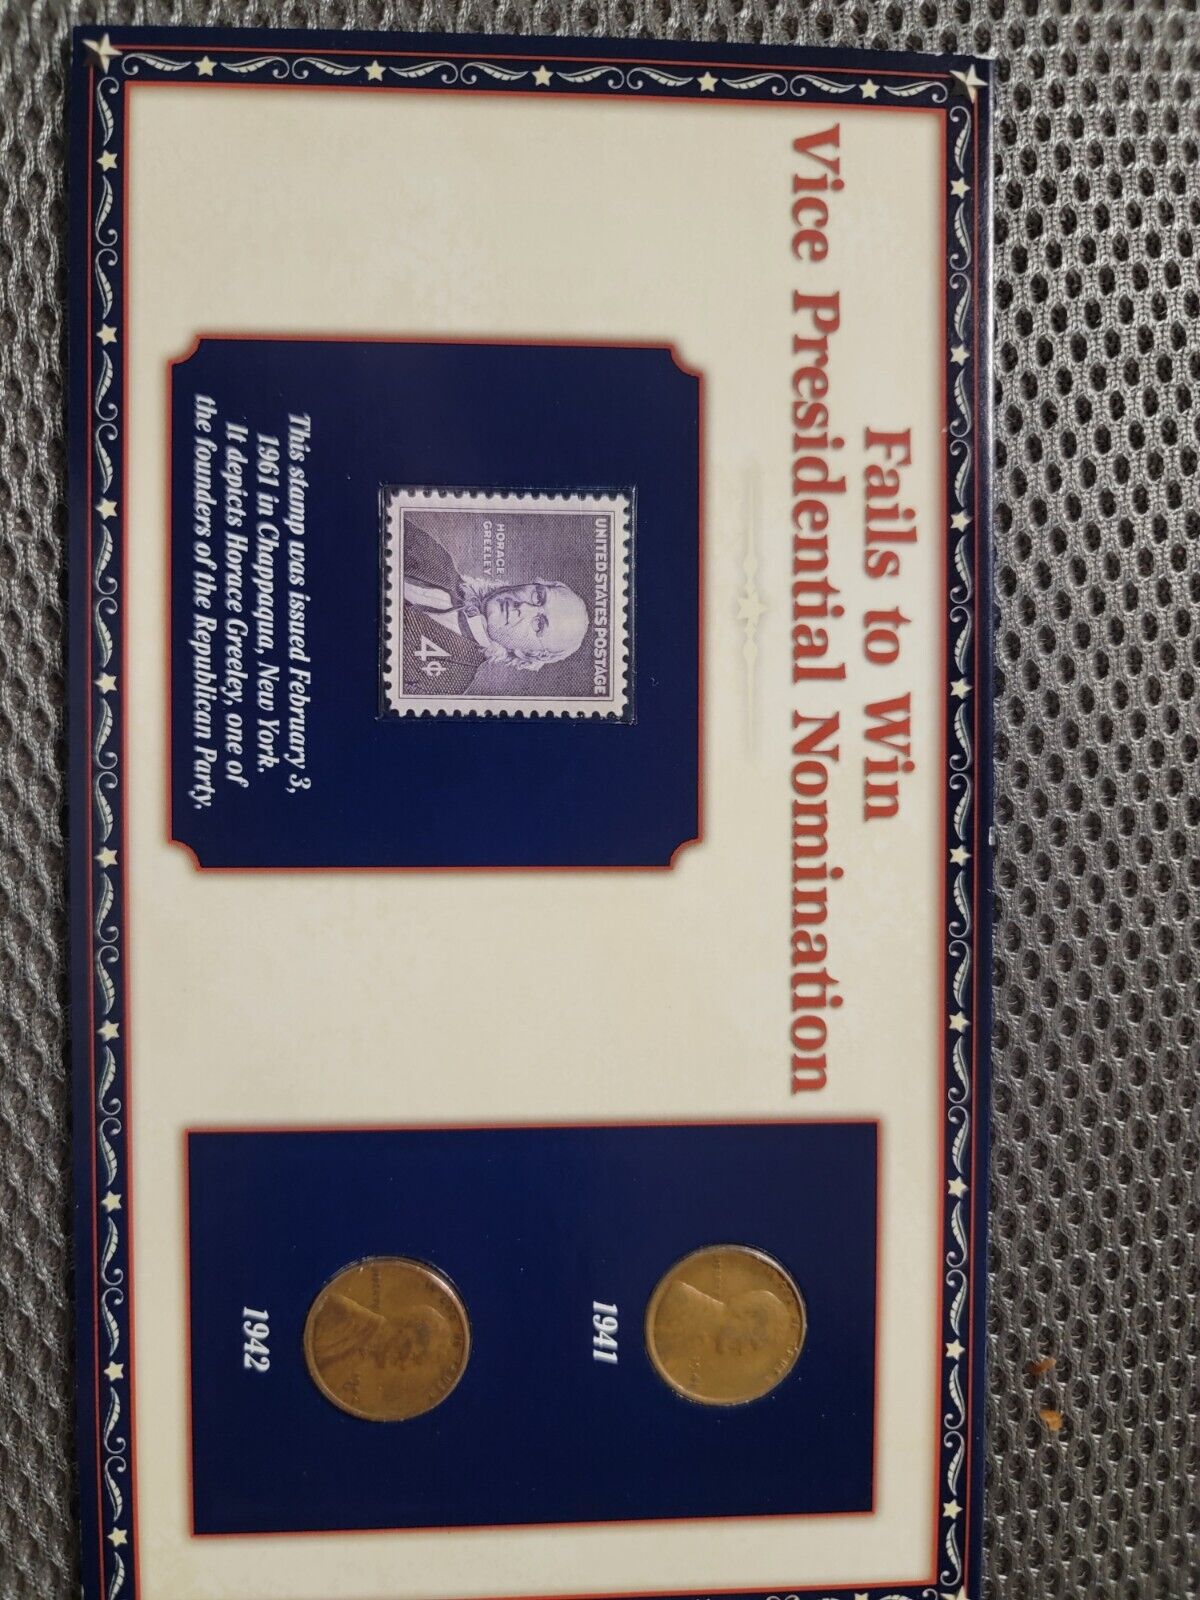 100 Years of Lincoln Coins & Stamp Card- Horace Greeley Fails VP Nomination